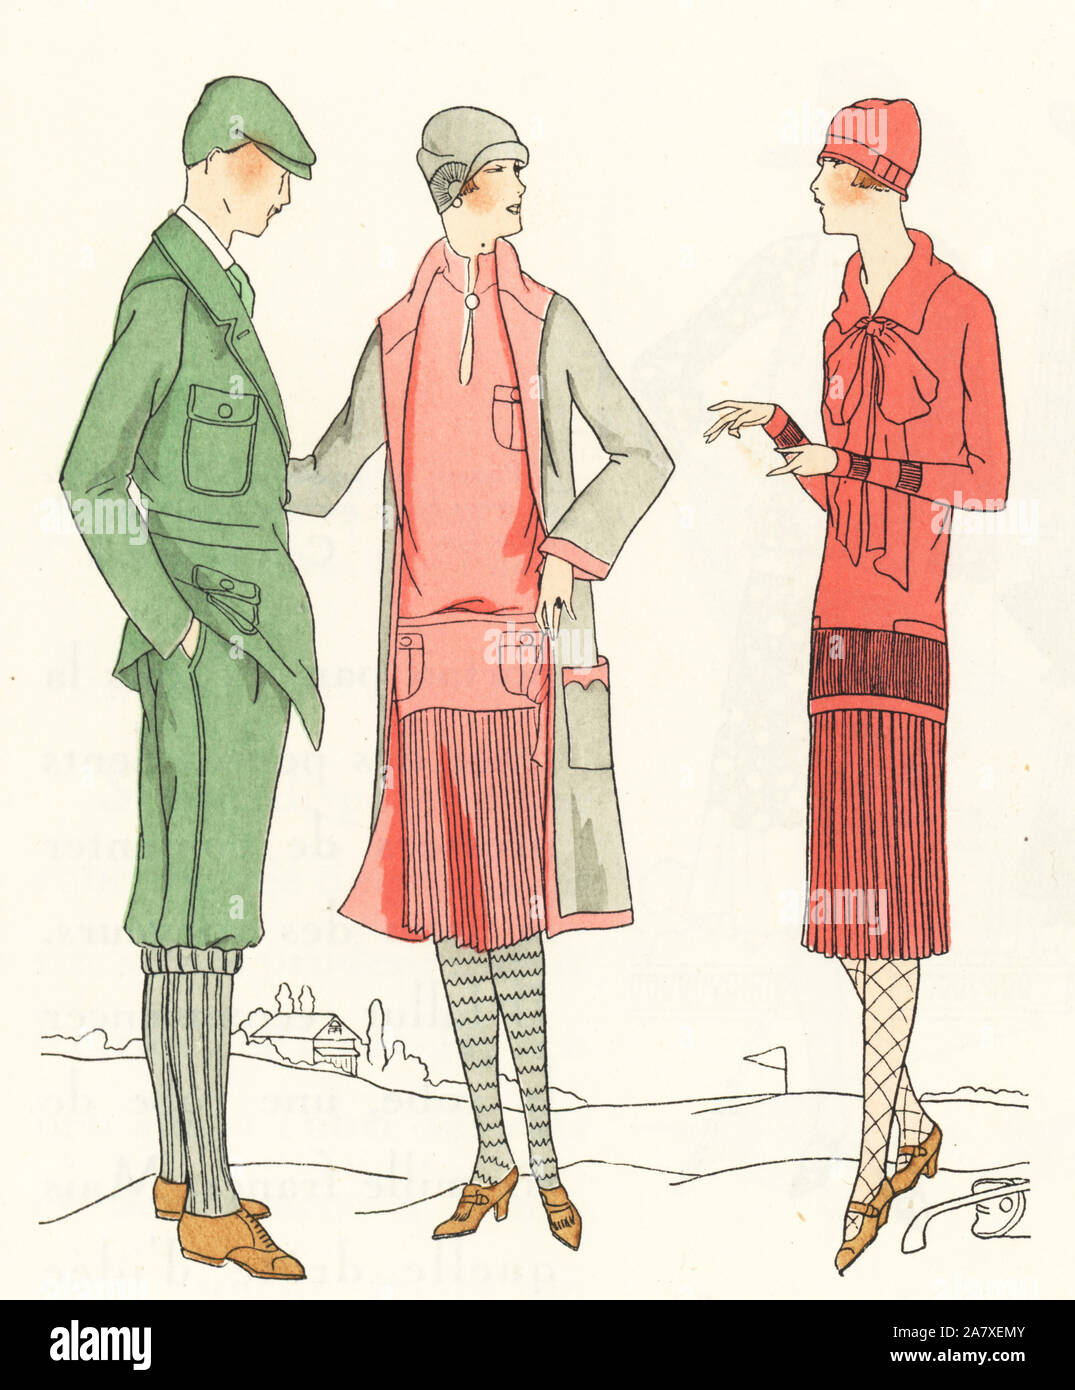 Man and women in sports wear on a golf course. Woman in ensemble of pink crepe de chine, and another woman in sports wear of crepe de chine pleated skirt and jersey sweater. Handcolored pochoir (stencil) lithograph from the French luxury fashion magazine Art, Gout, Beaute, 1926. Stock Photo